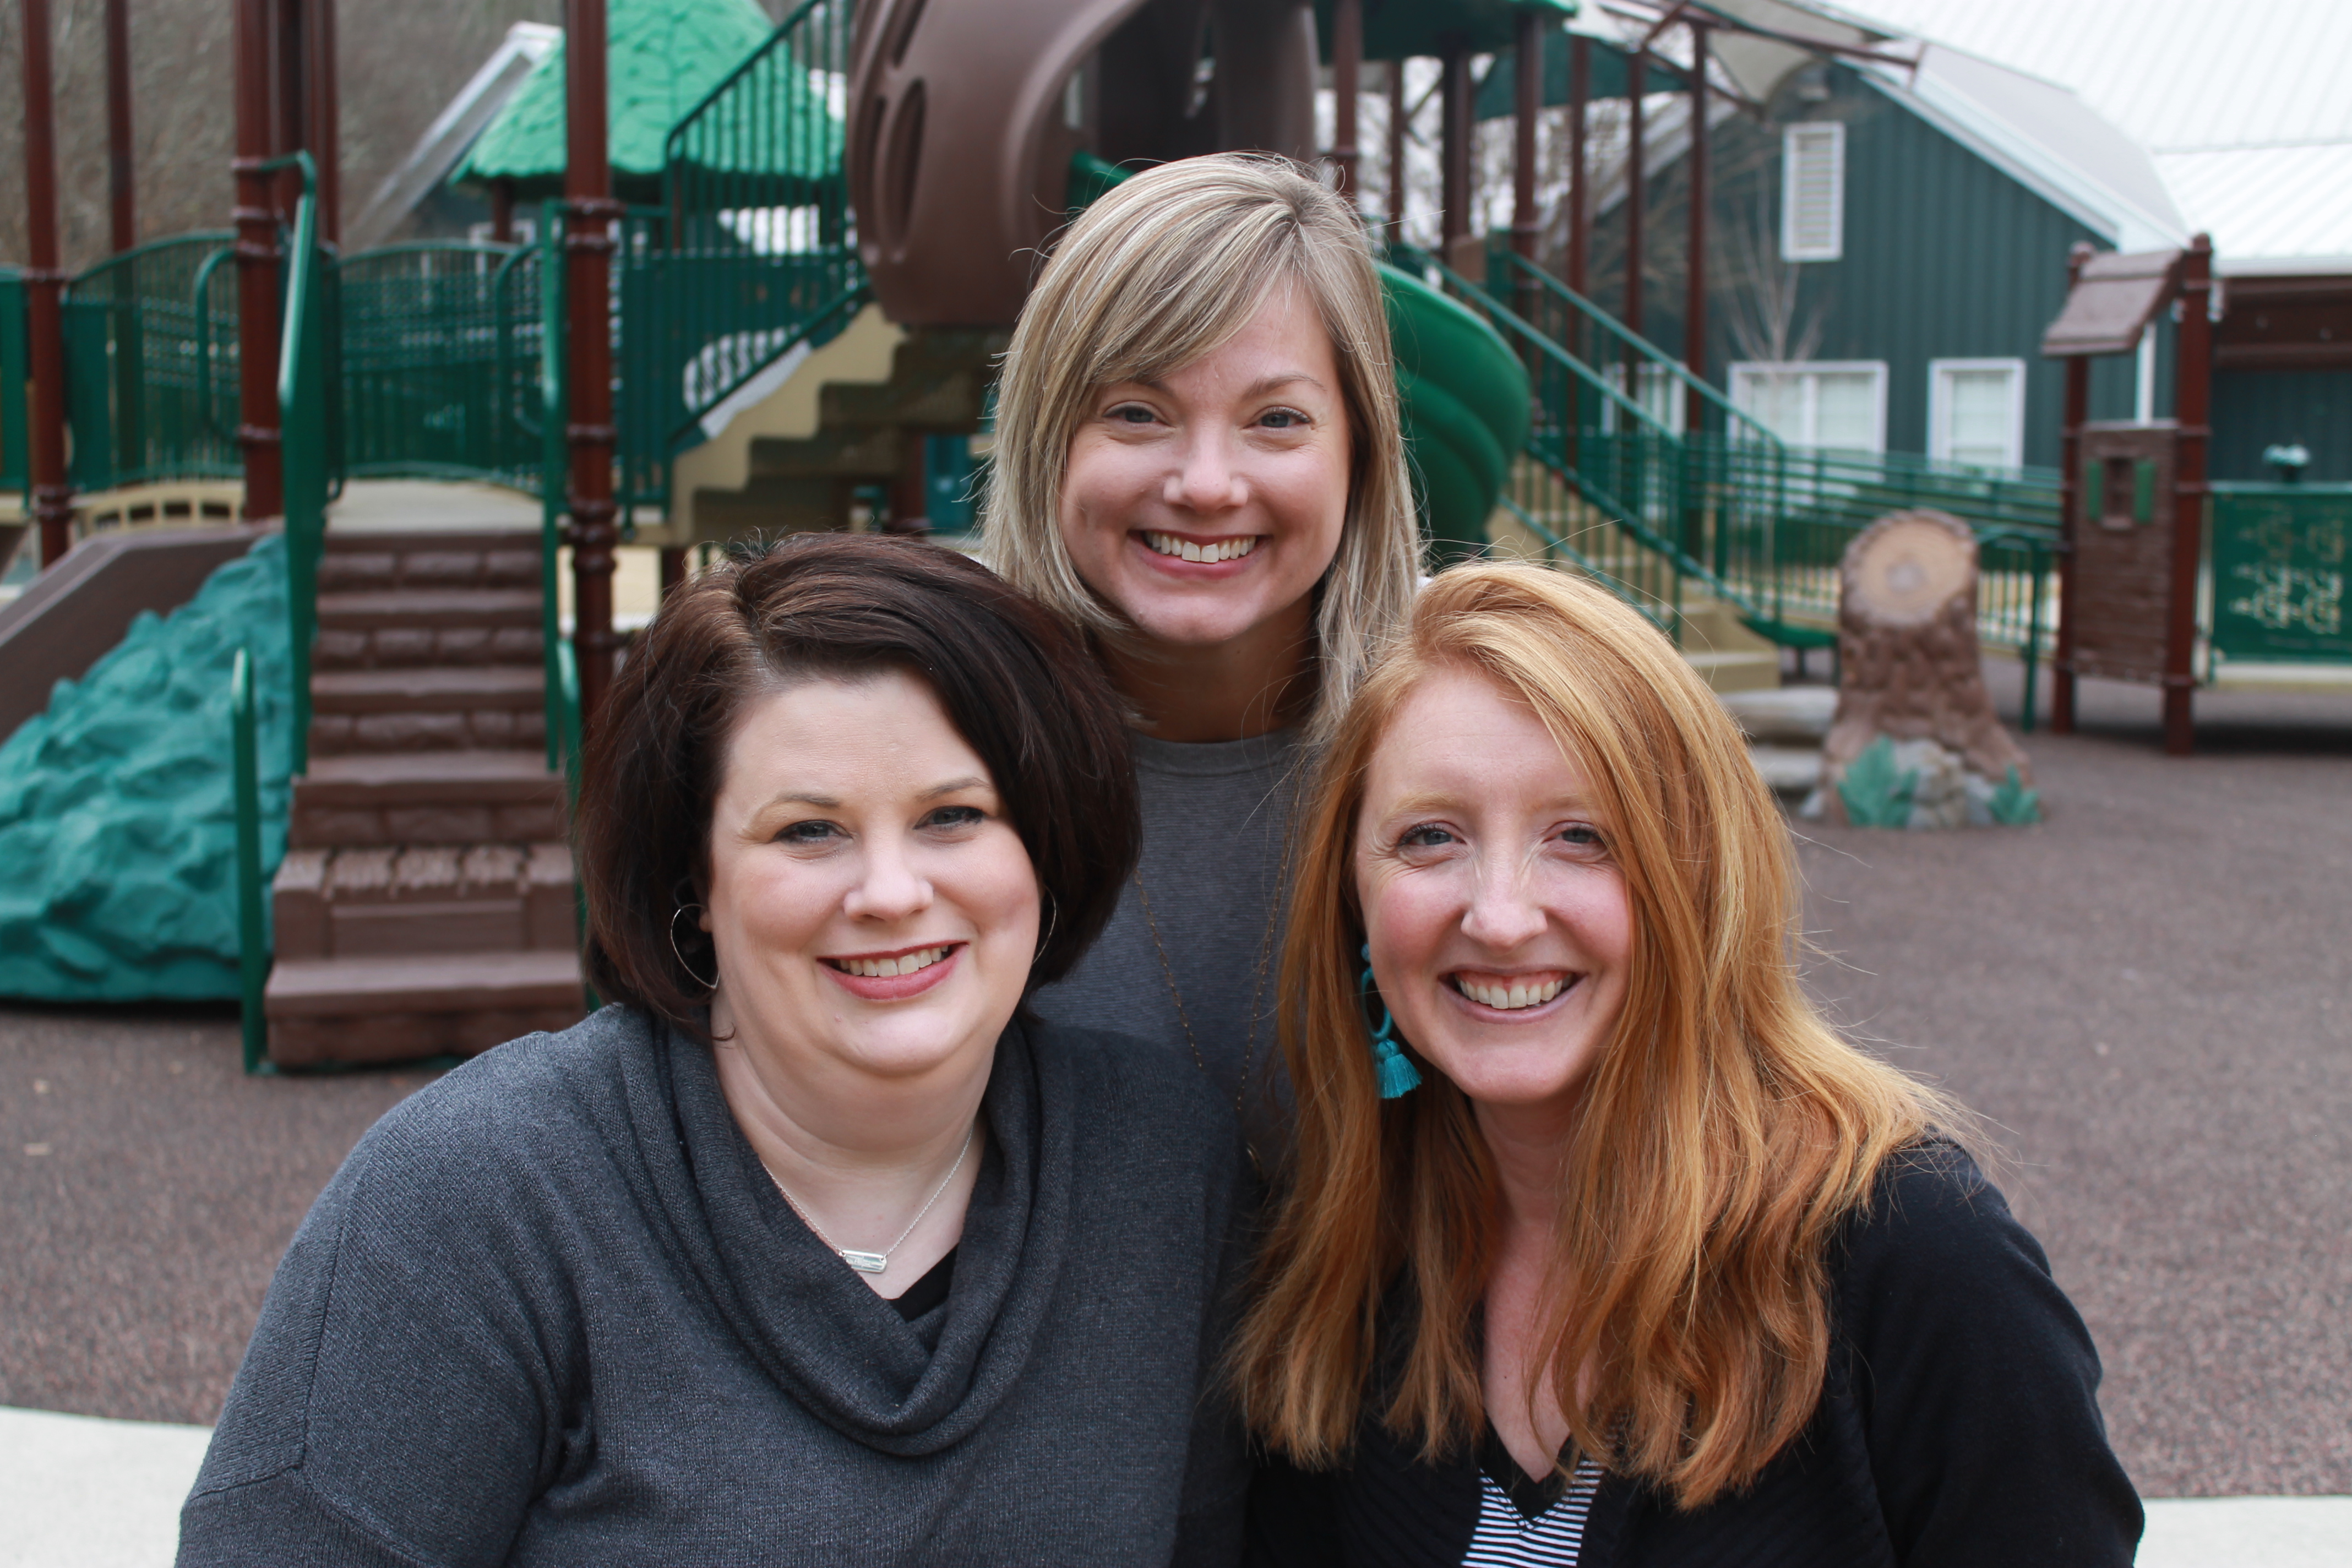 Lynn Roebuck, Meredith Hankins, and Melissa Pouncey outside at a playground